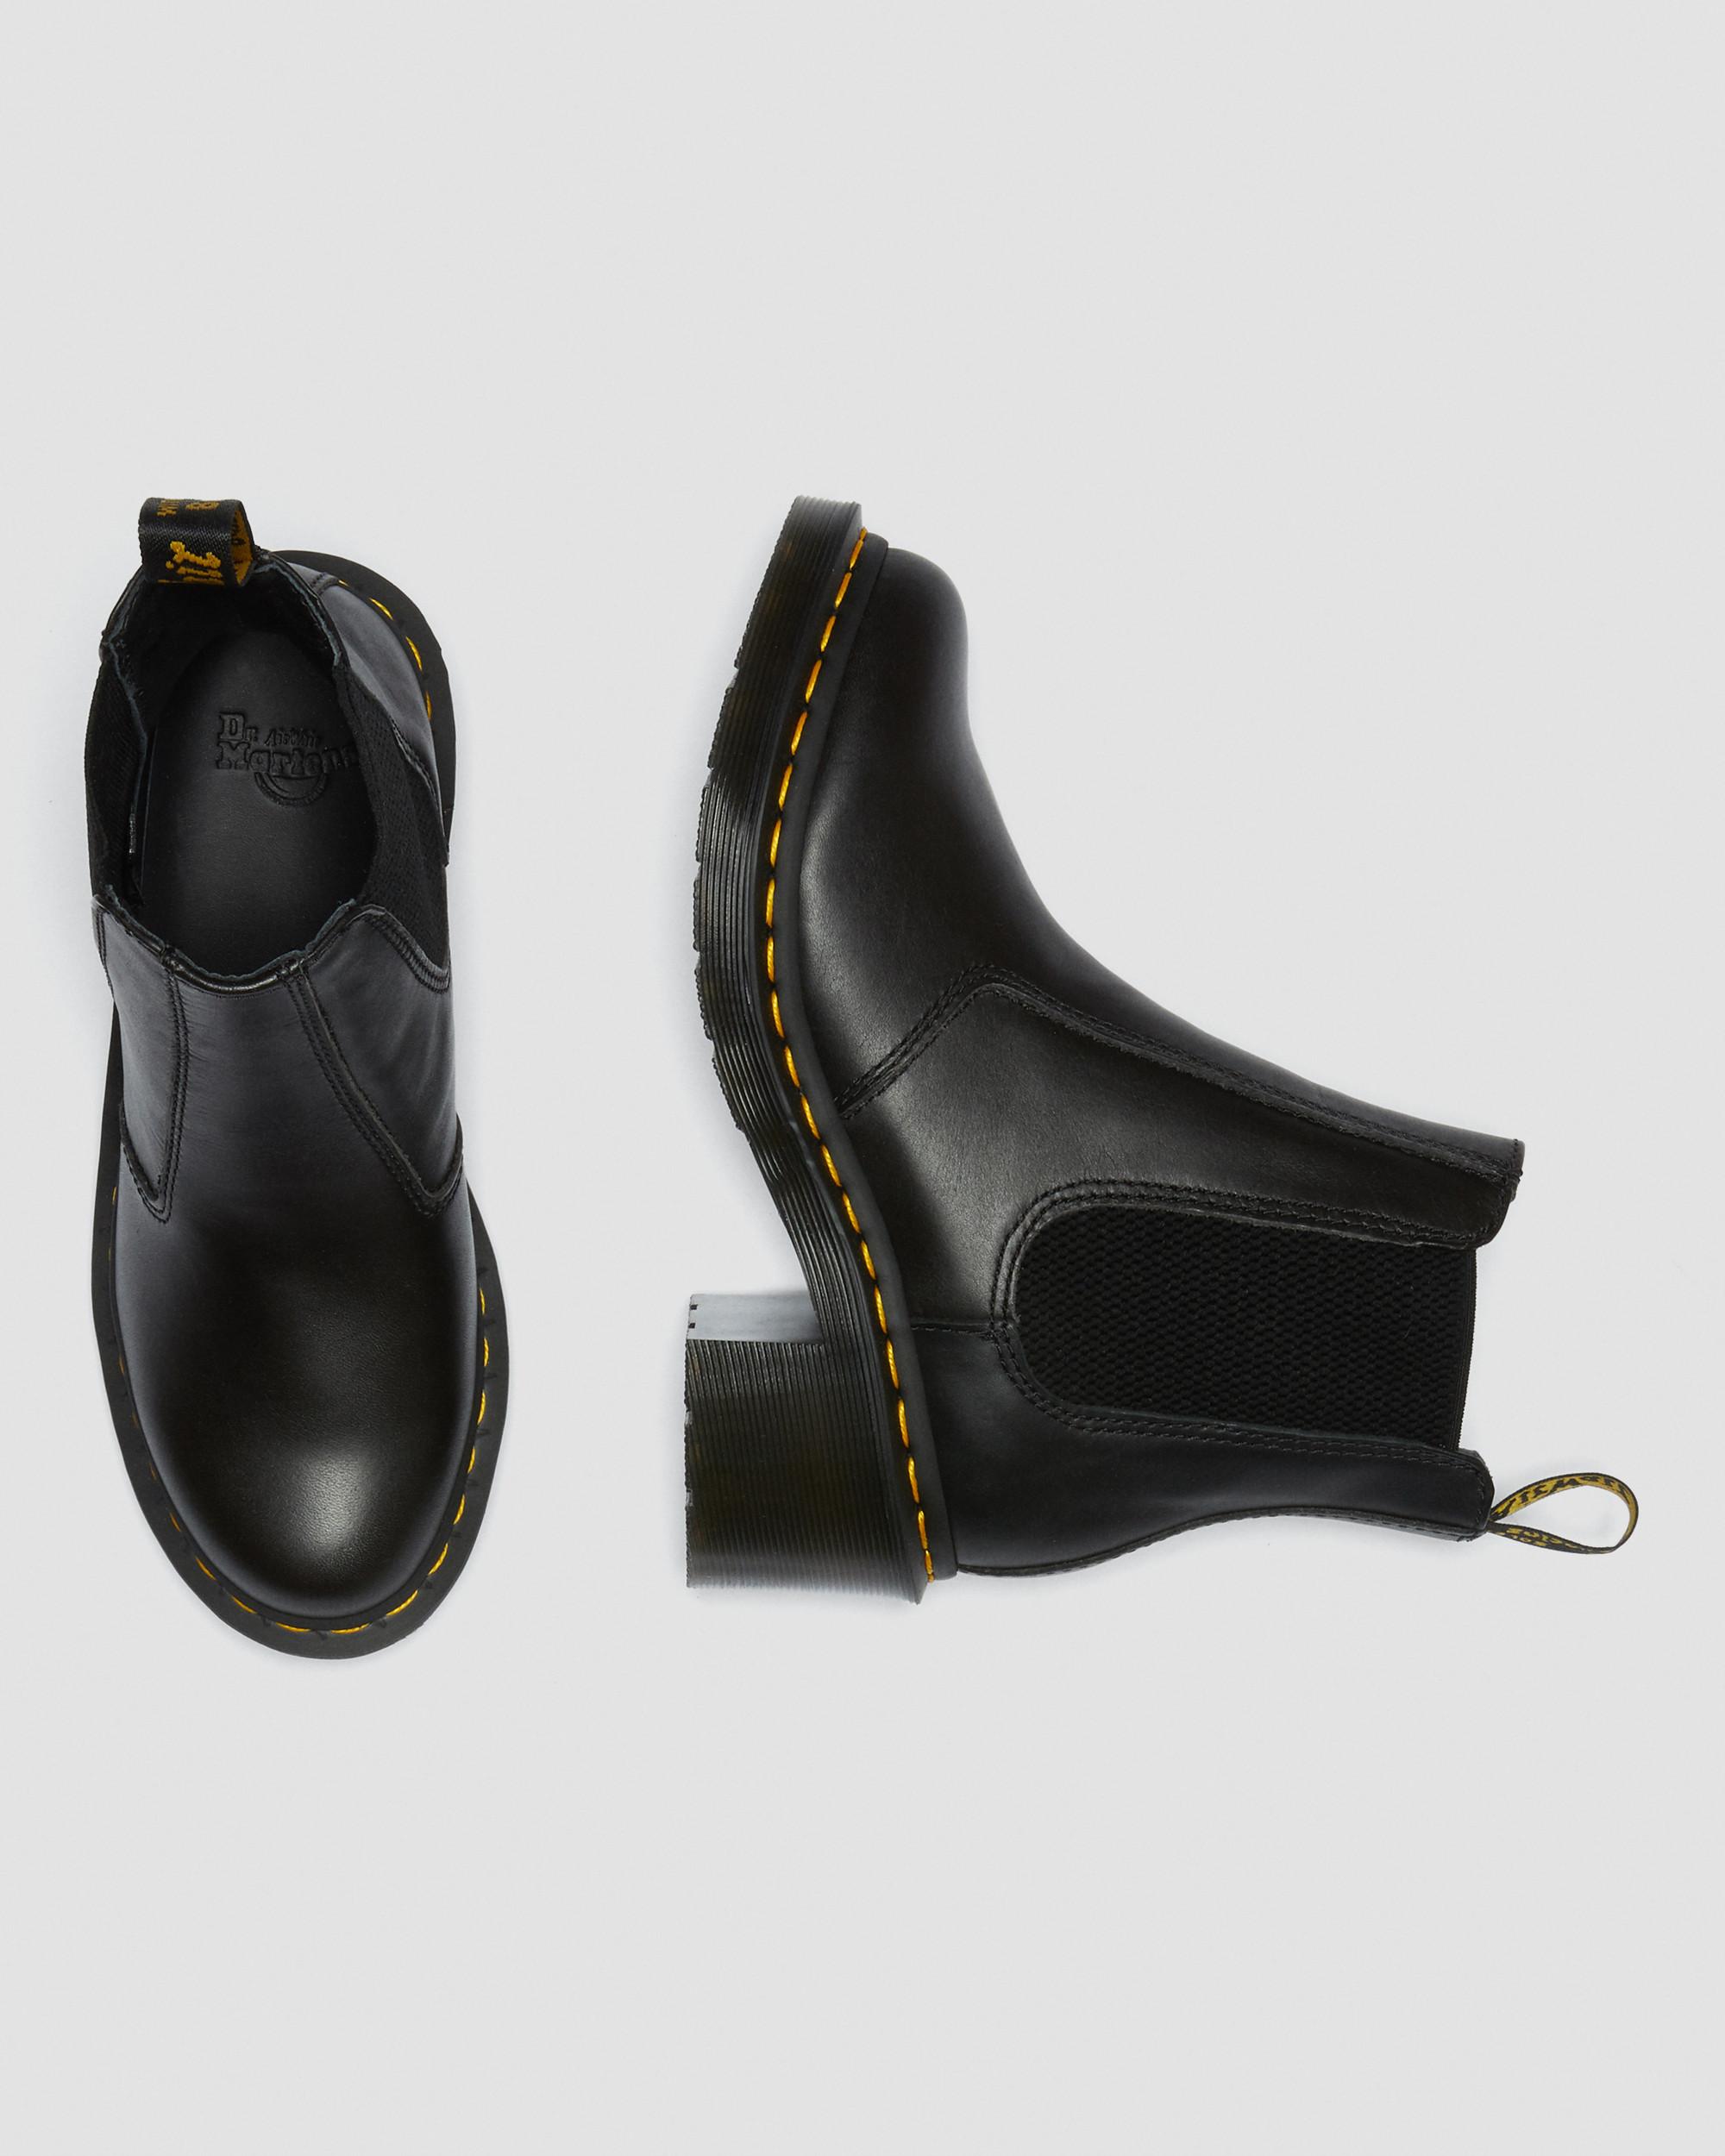 Cadence Women's Leather Heeled Chelsea Boots | Dr. Martens